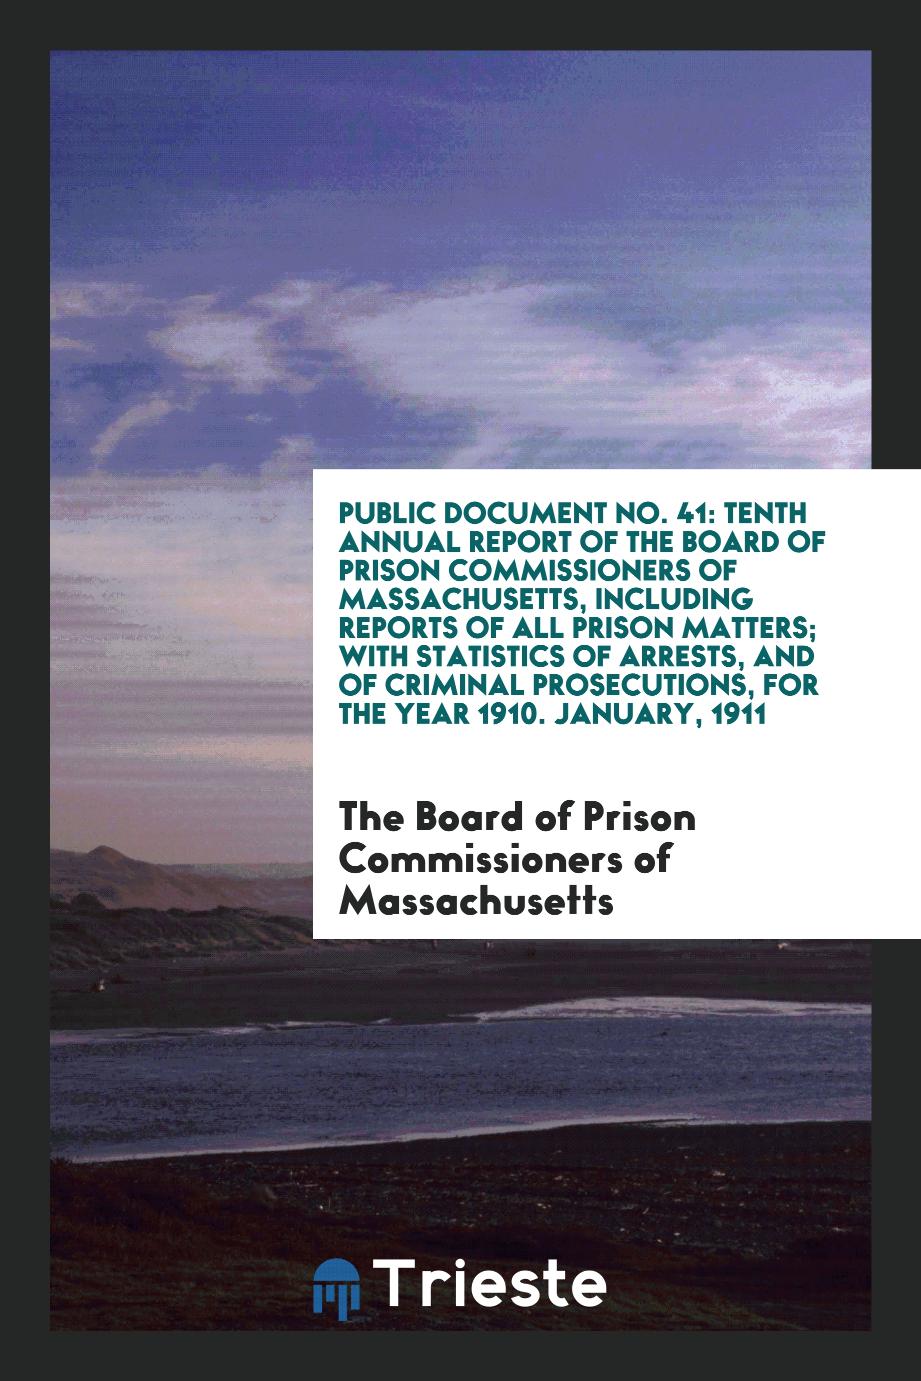 Public Document No. 41: Tenth Annual Report of the Board of Prison Commissioners of Massachusetts, Including reports of All Prison Matters; With Statistics of Arrests, and of Criminal Prosecutions, for the Year 1910. January, 1911